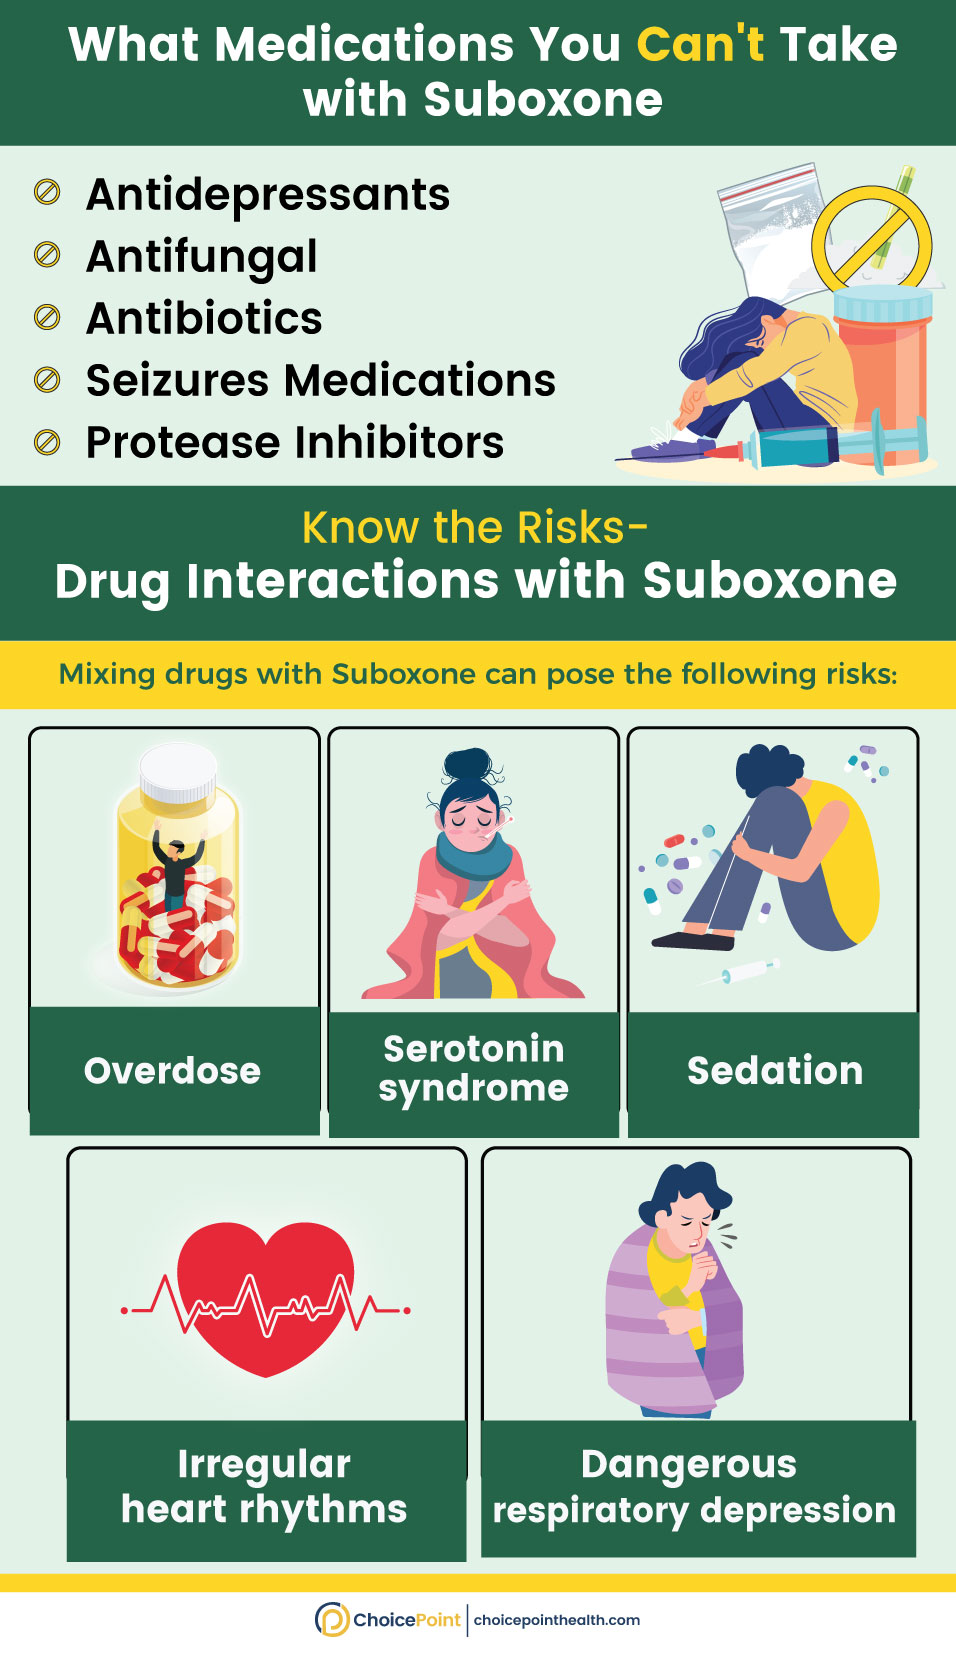 What Medications Can You Not Take With Suboxone?